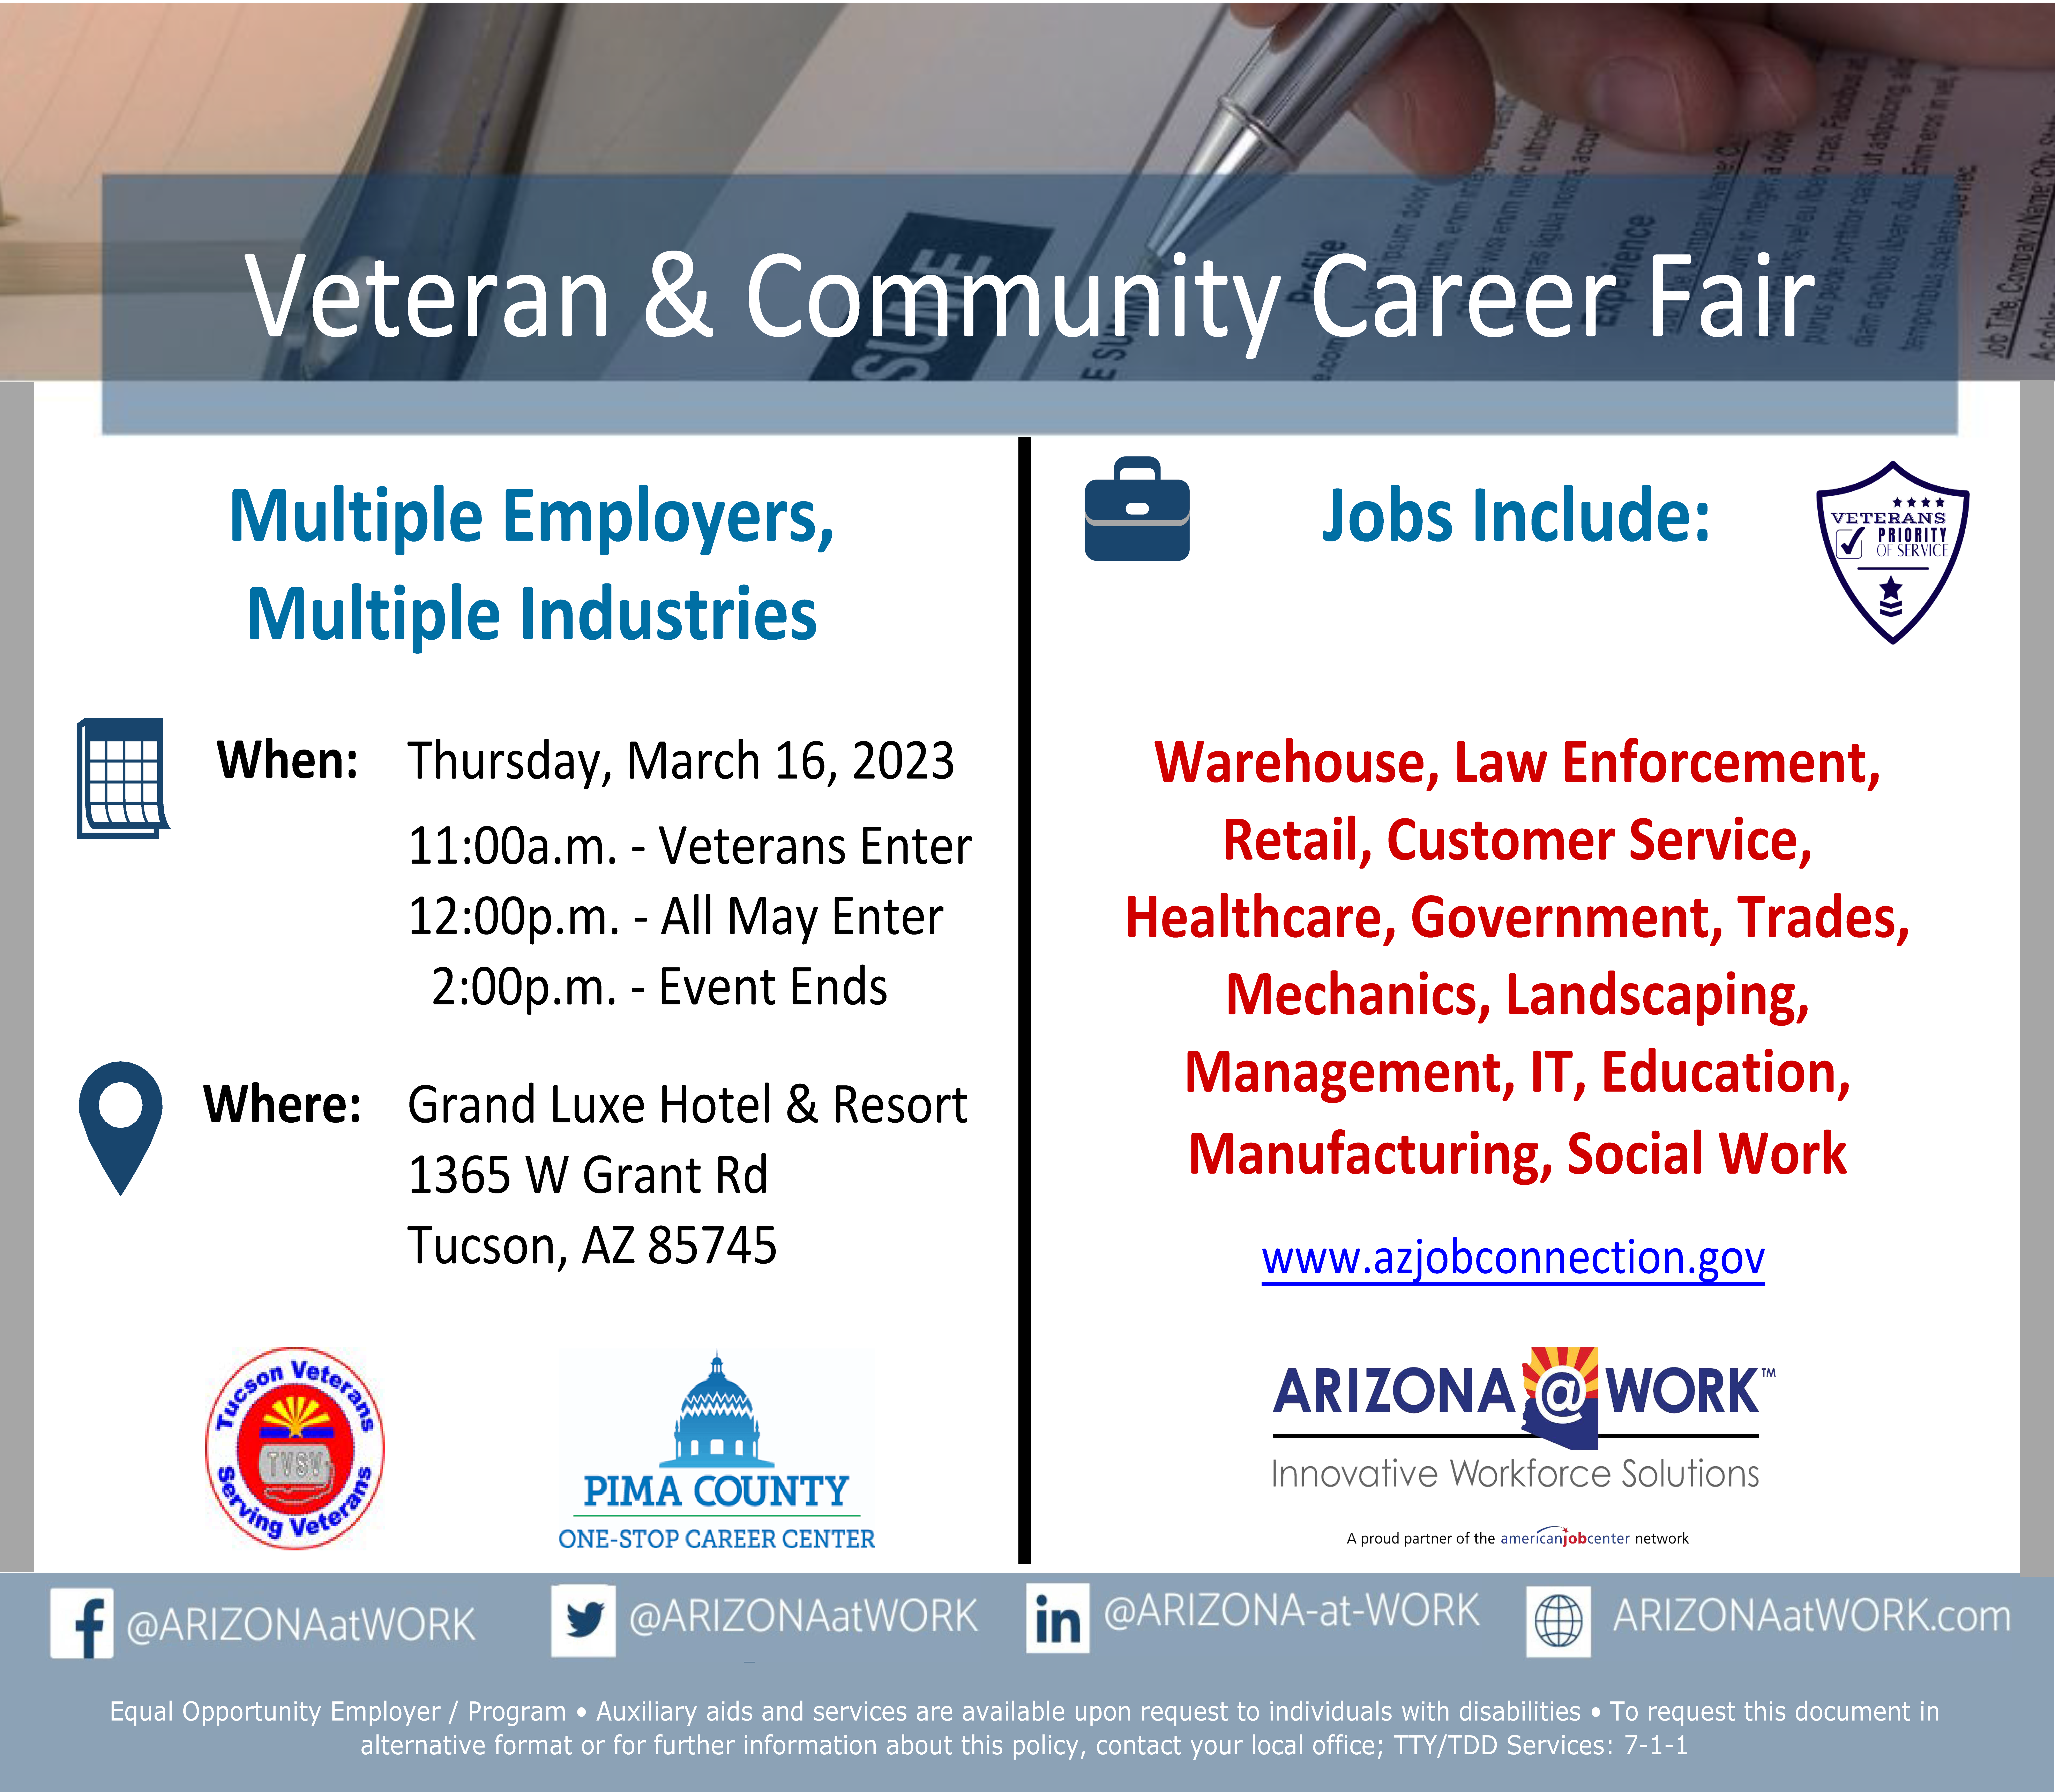 Veteran and Community Career Fair flyer - 3/16/2023. Time: 11:00am (veterans enter),  12:00pm (all may enter), until 2:00 pm (event concludes). Location: Grand Luxe Hotel & Resort, 1365 W Grant Rd, Tucson, AZ 85745